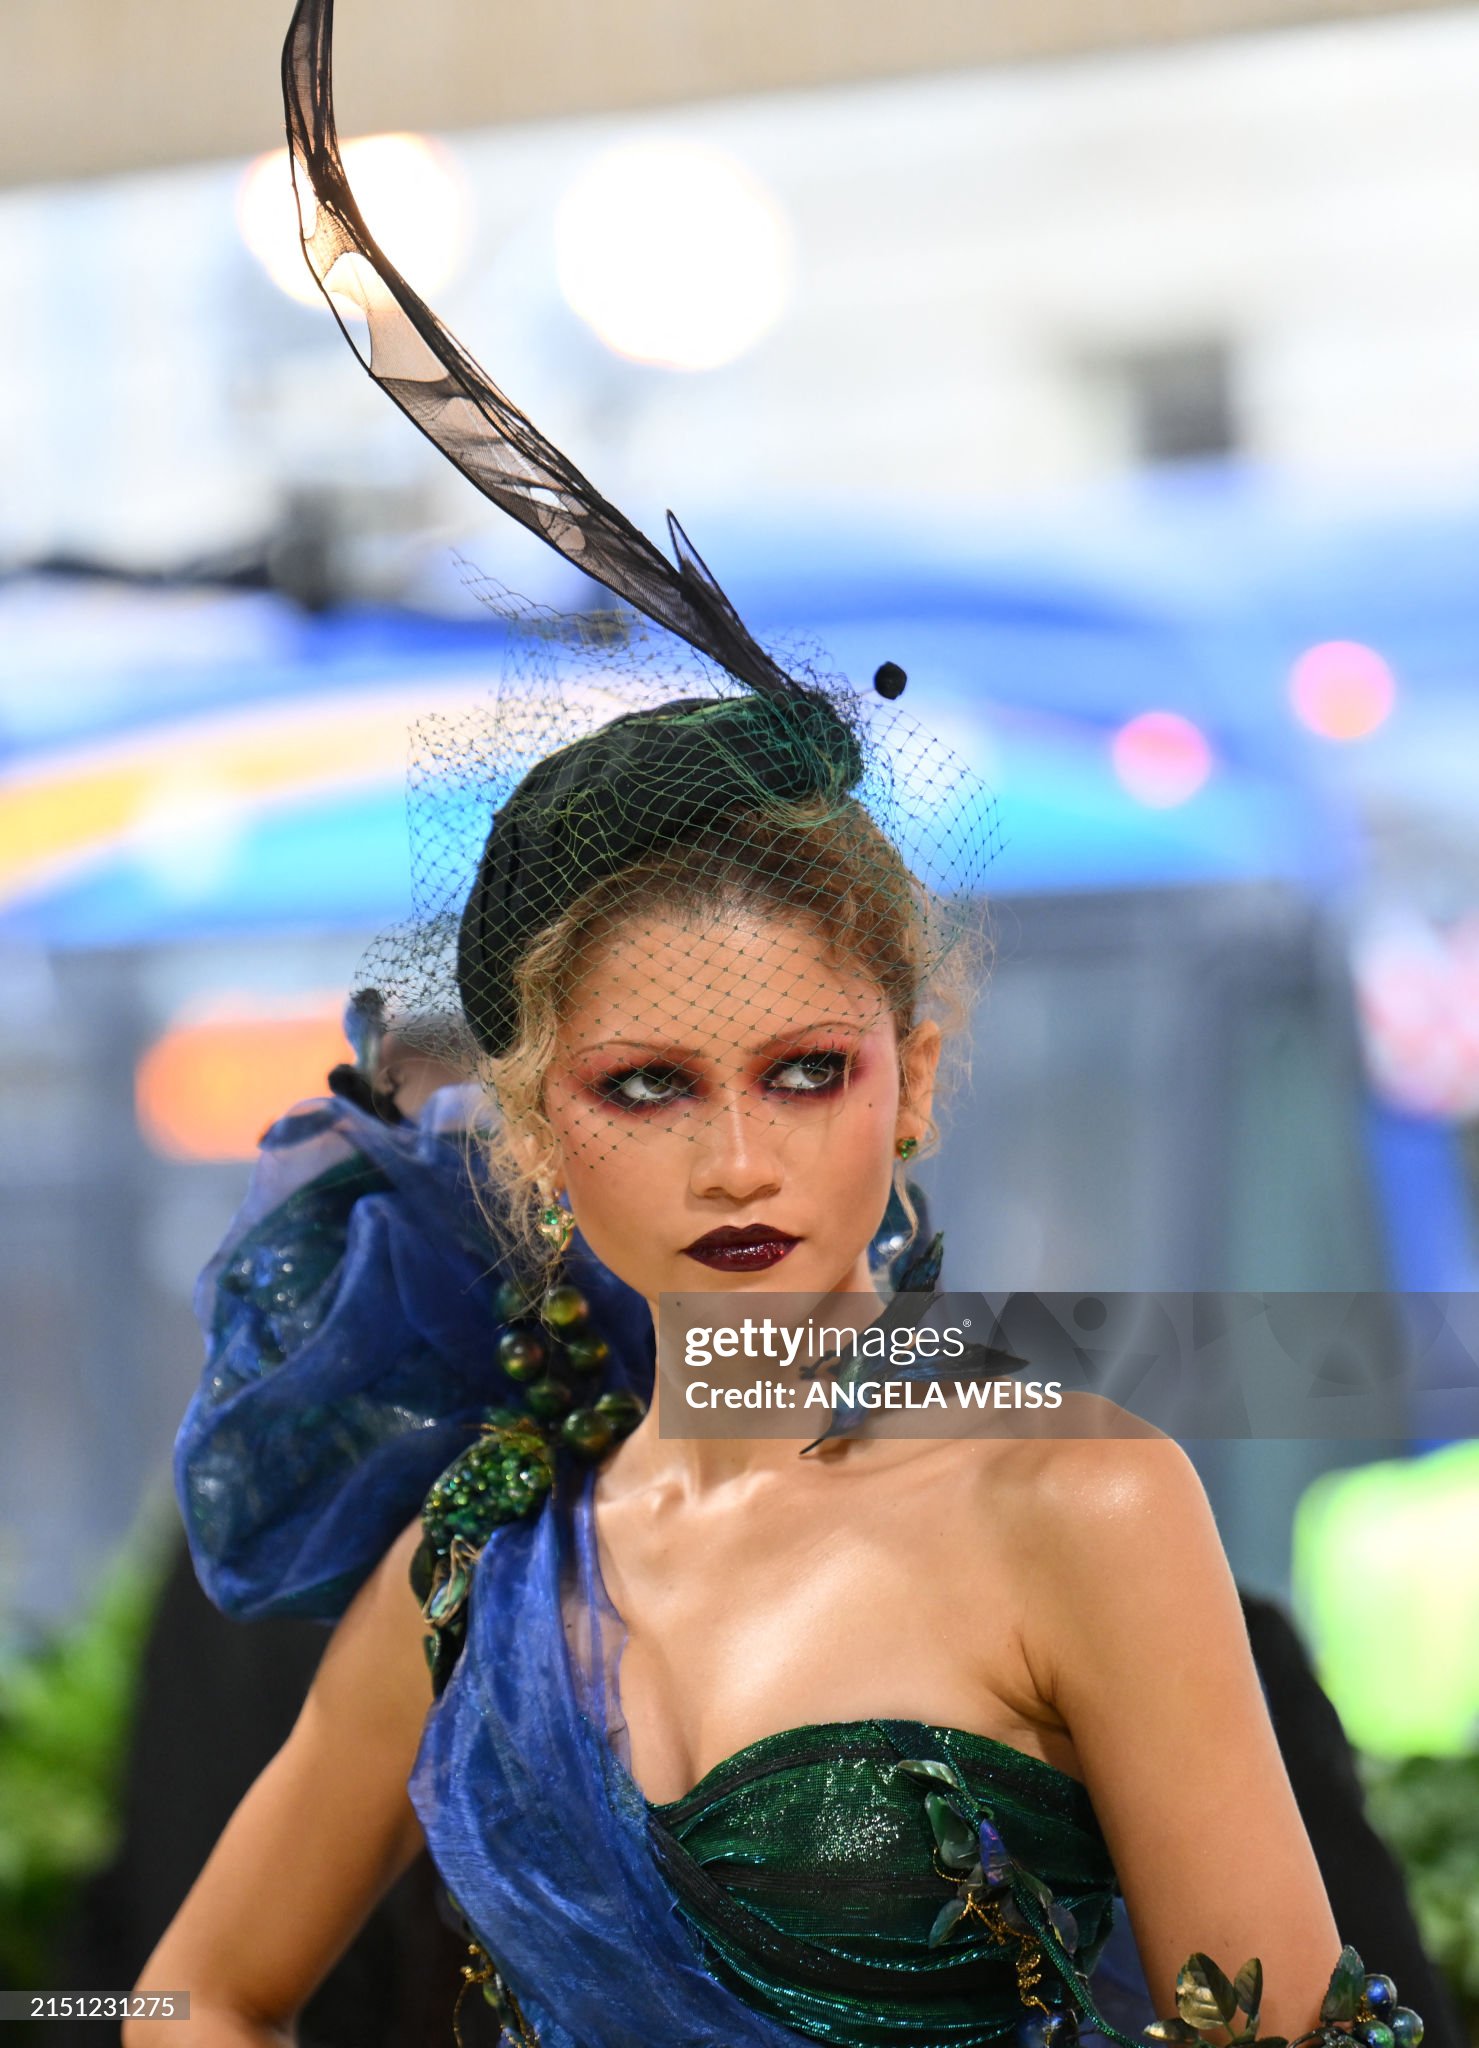 gettyimages-2151231275-2048x2048.jpg